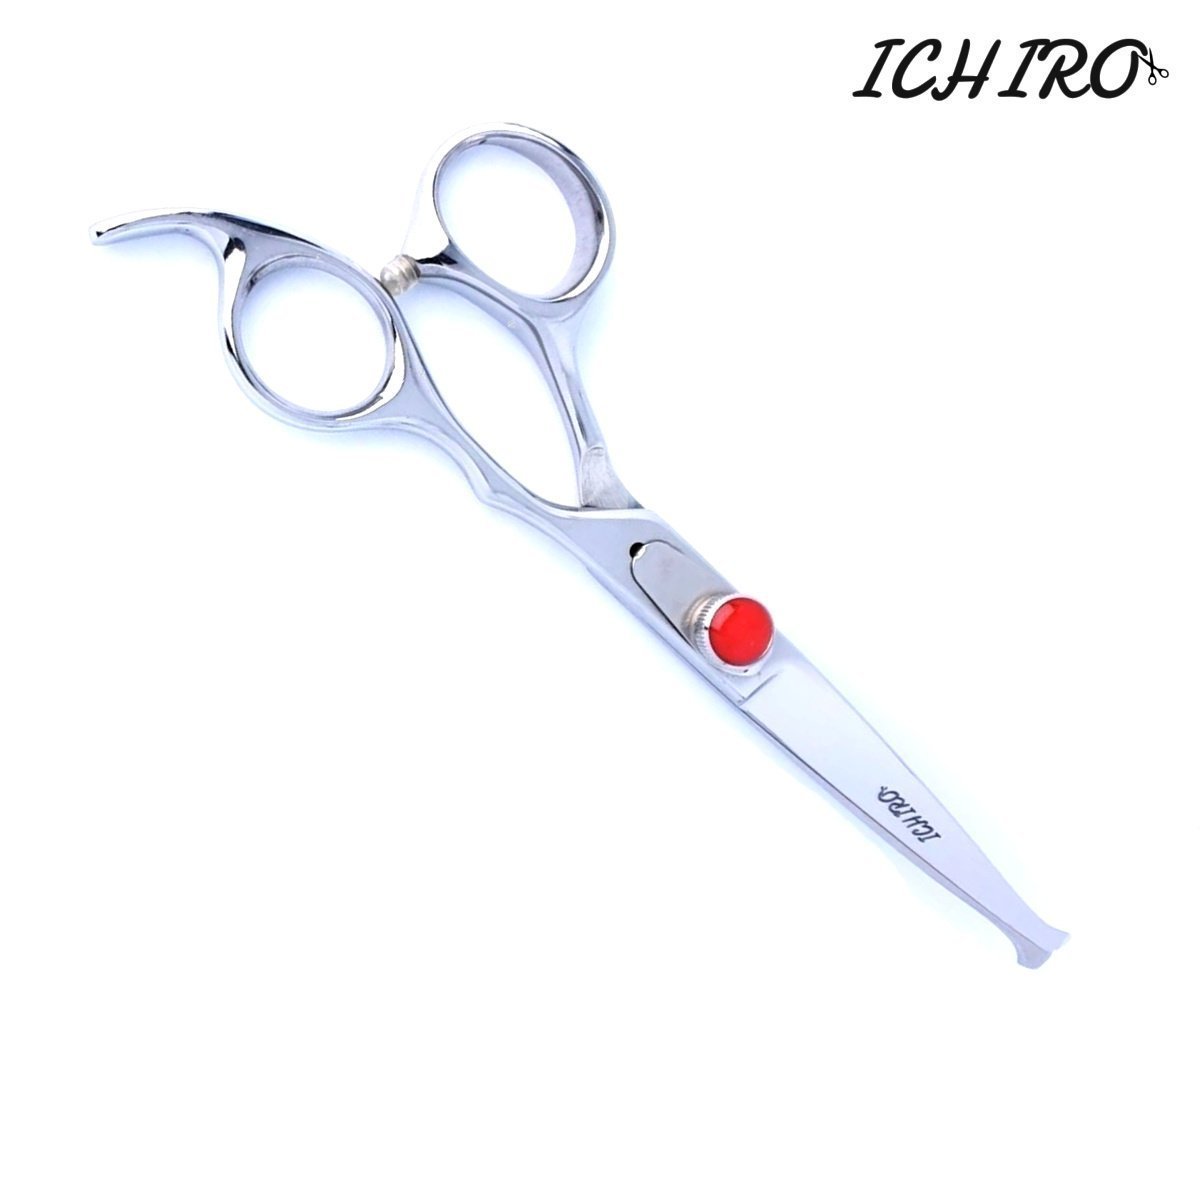 HARAC Toddler Scissors Spring Loaded, Safety Scissors for Kids and